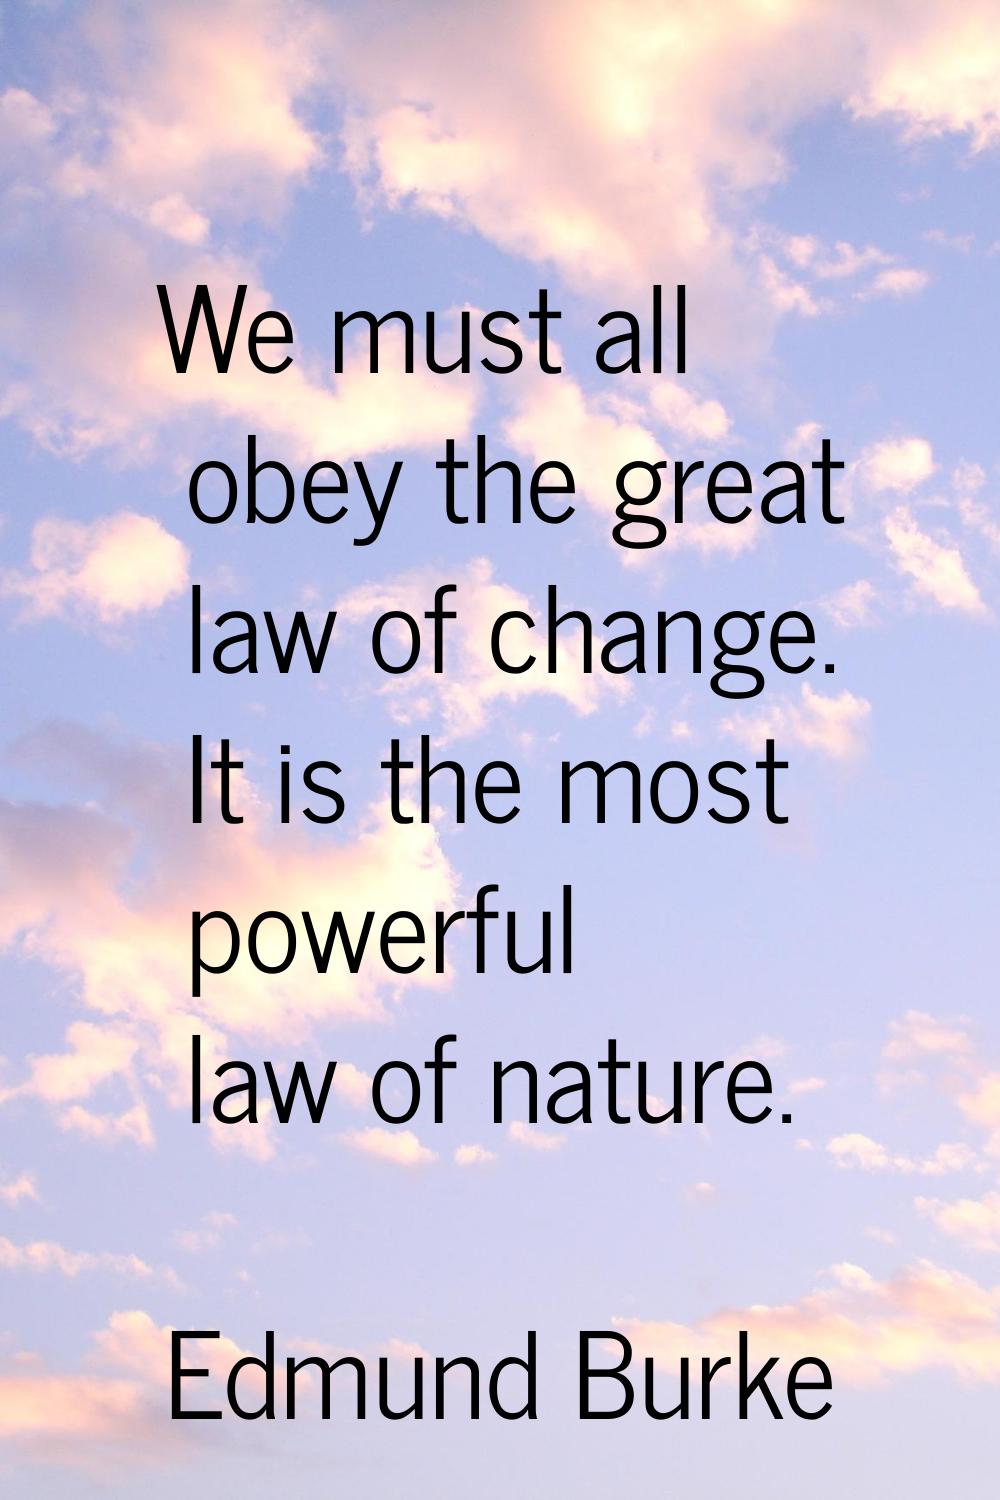 We must all obey the great law of change. It is the most powerful law of nature.